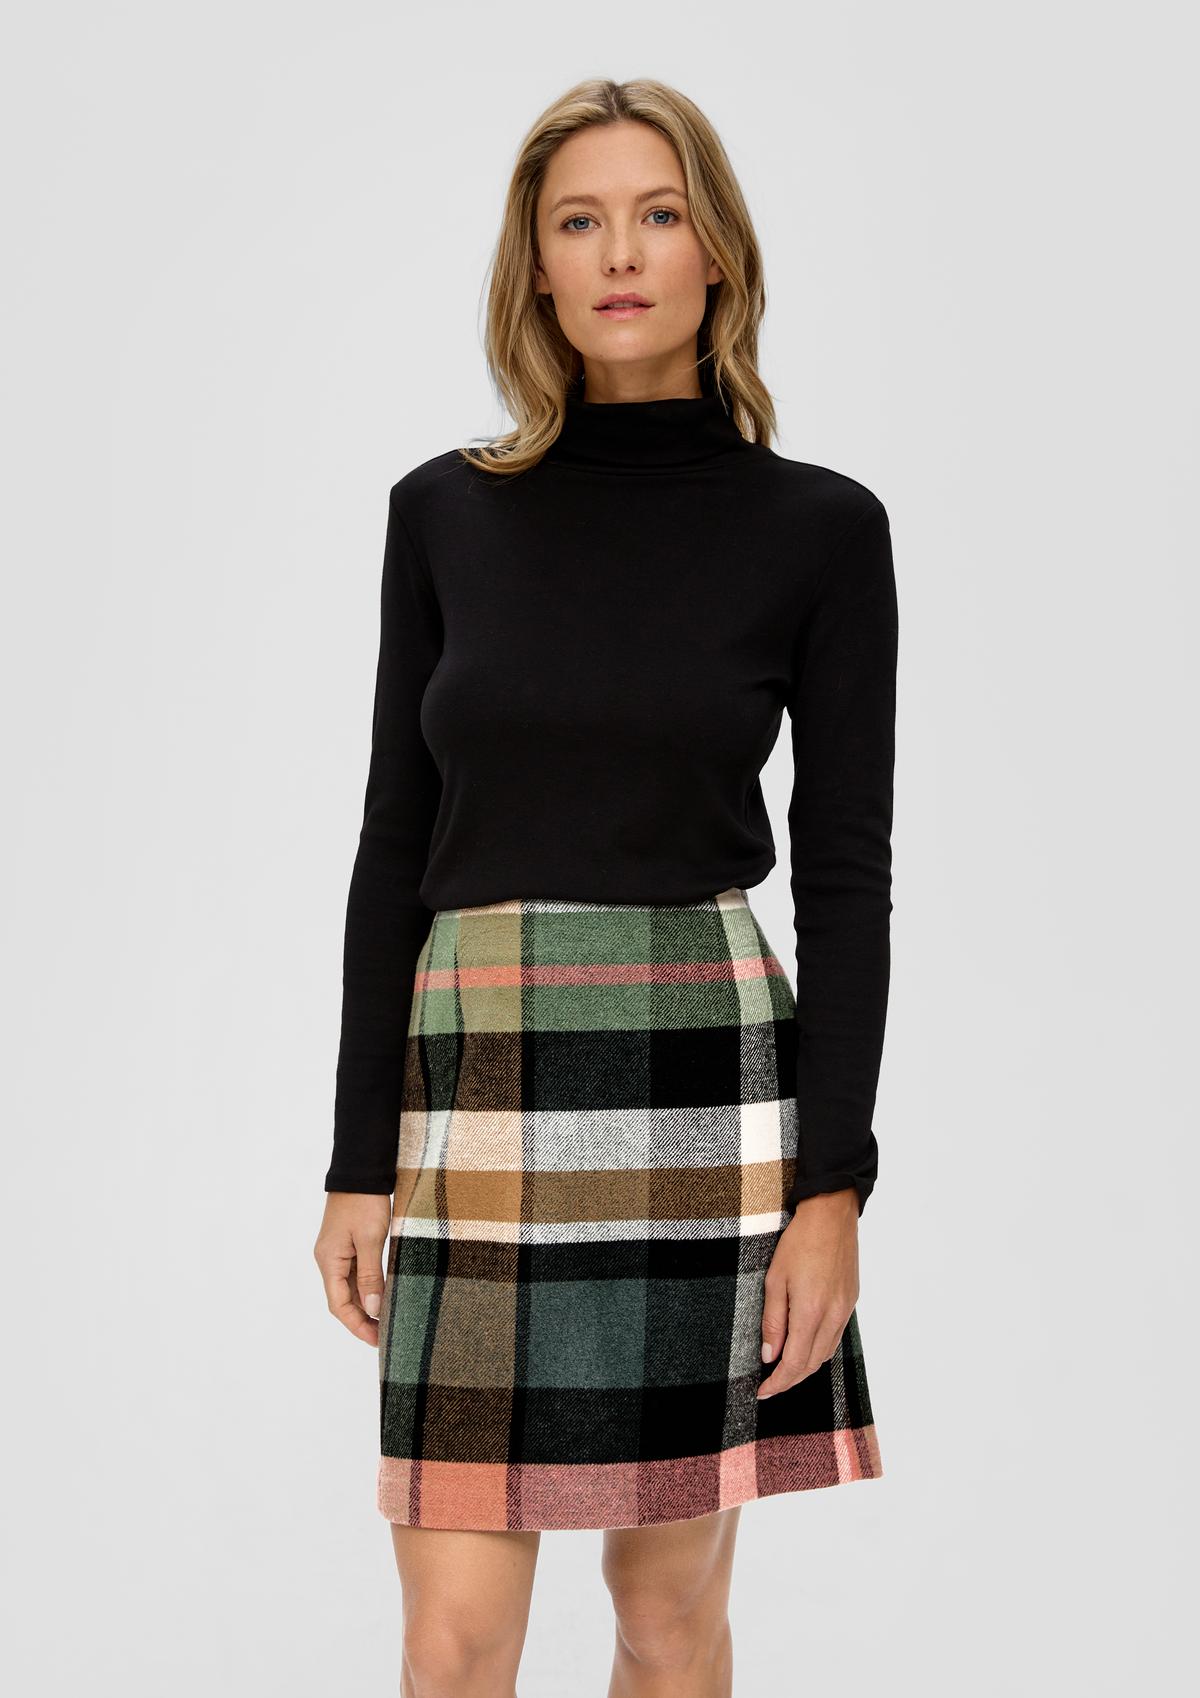 Skirt with a check pattern